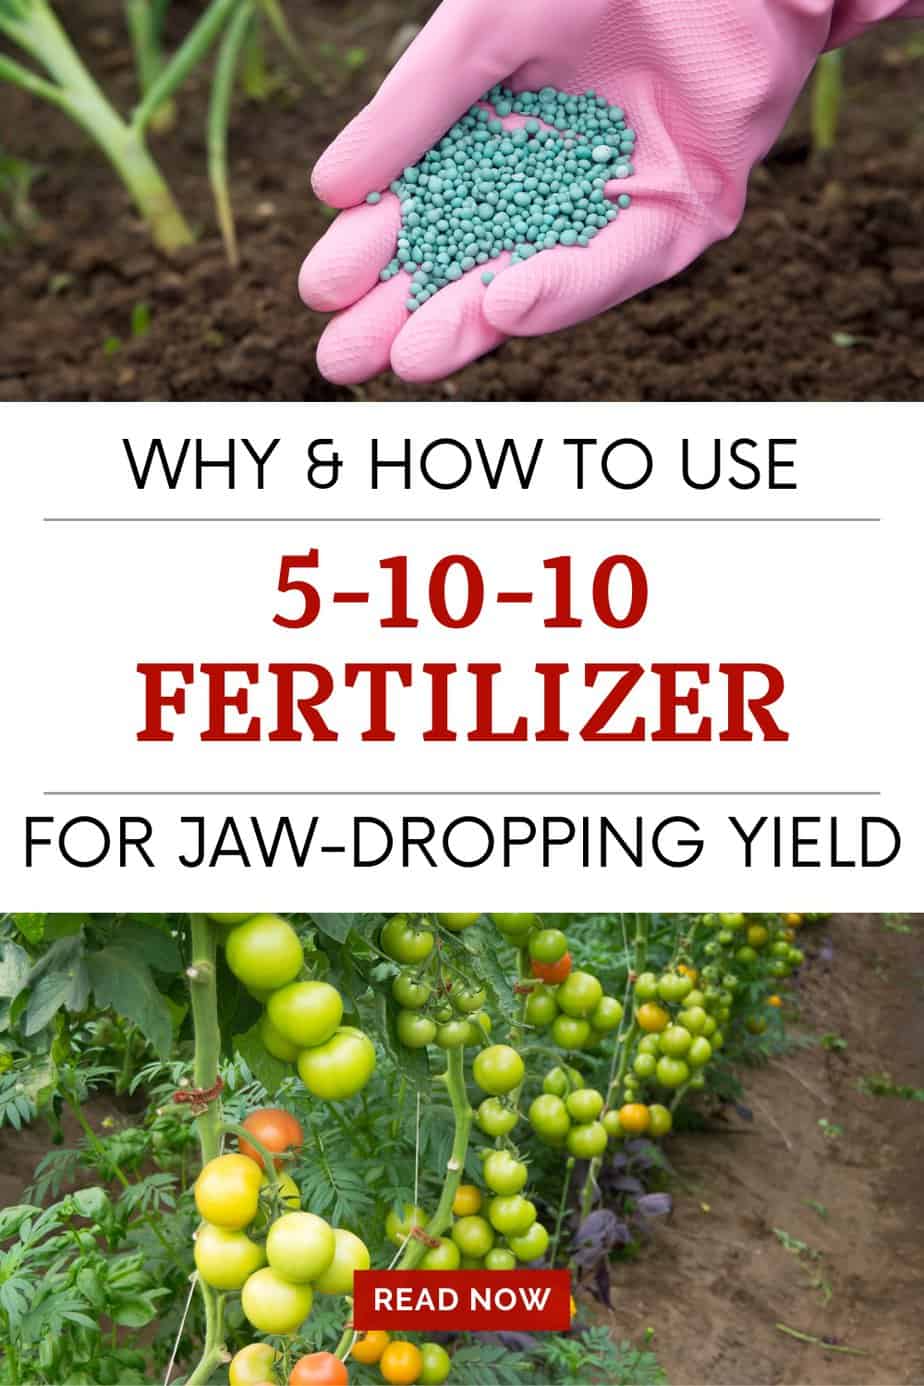 Why and how to use 5-10-10 fertilizer pin.